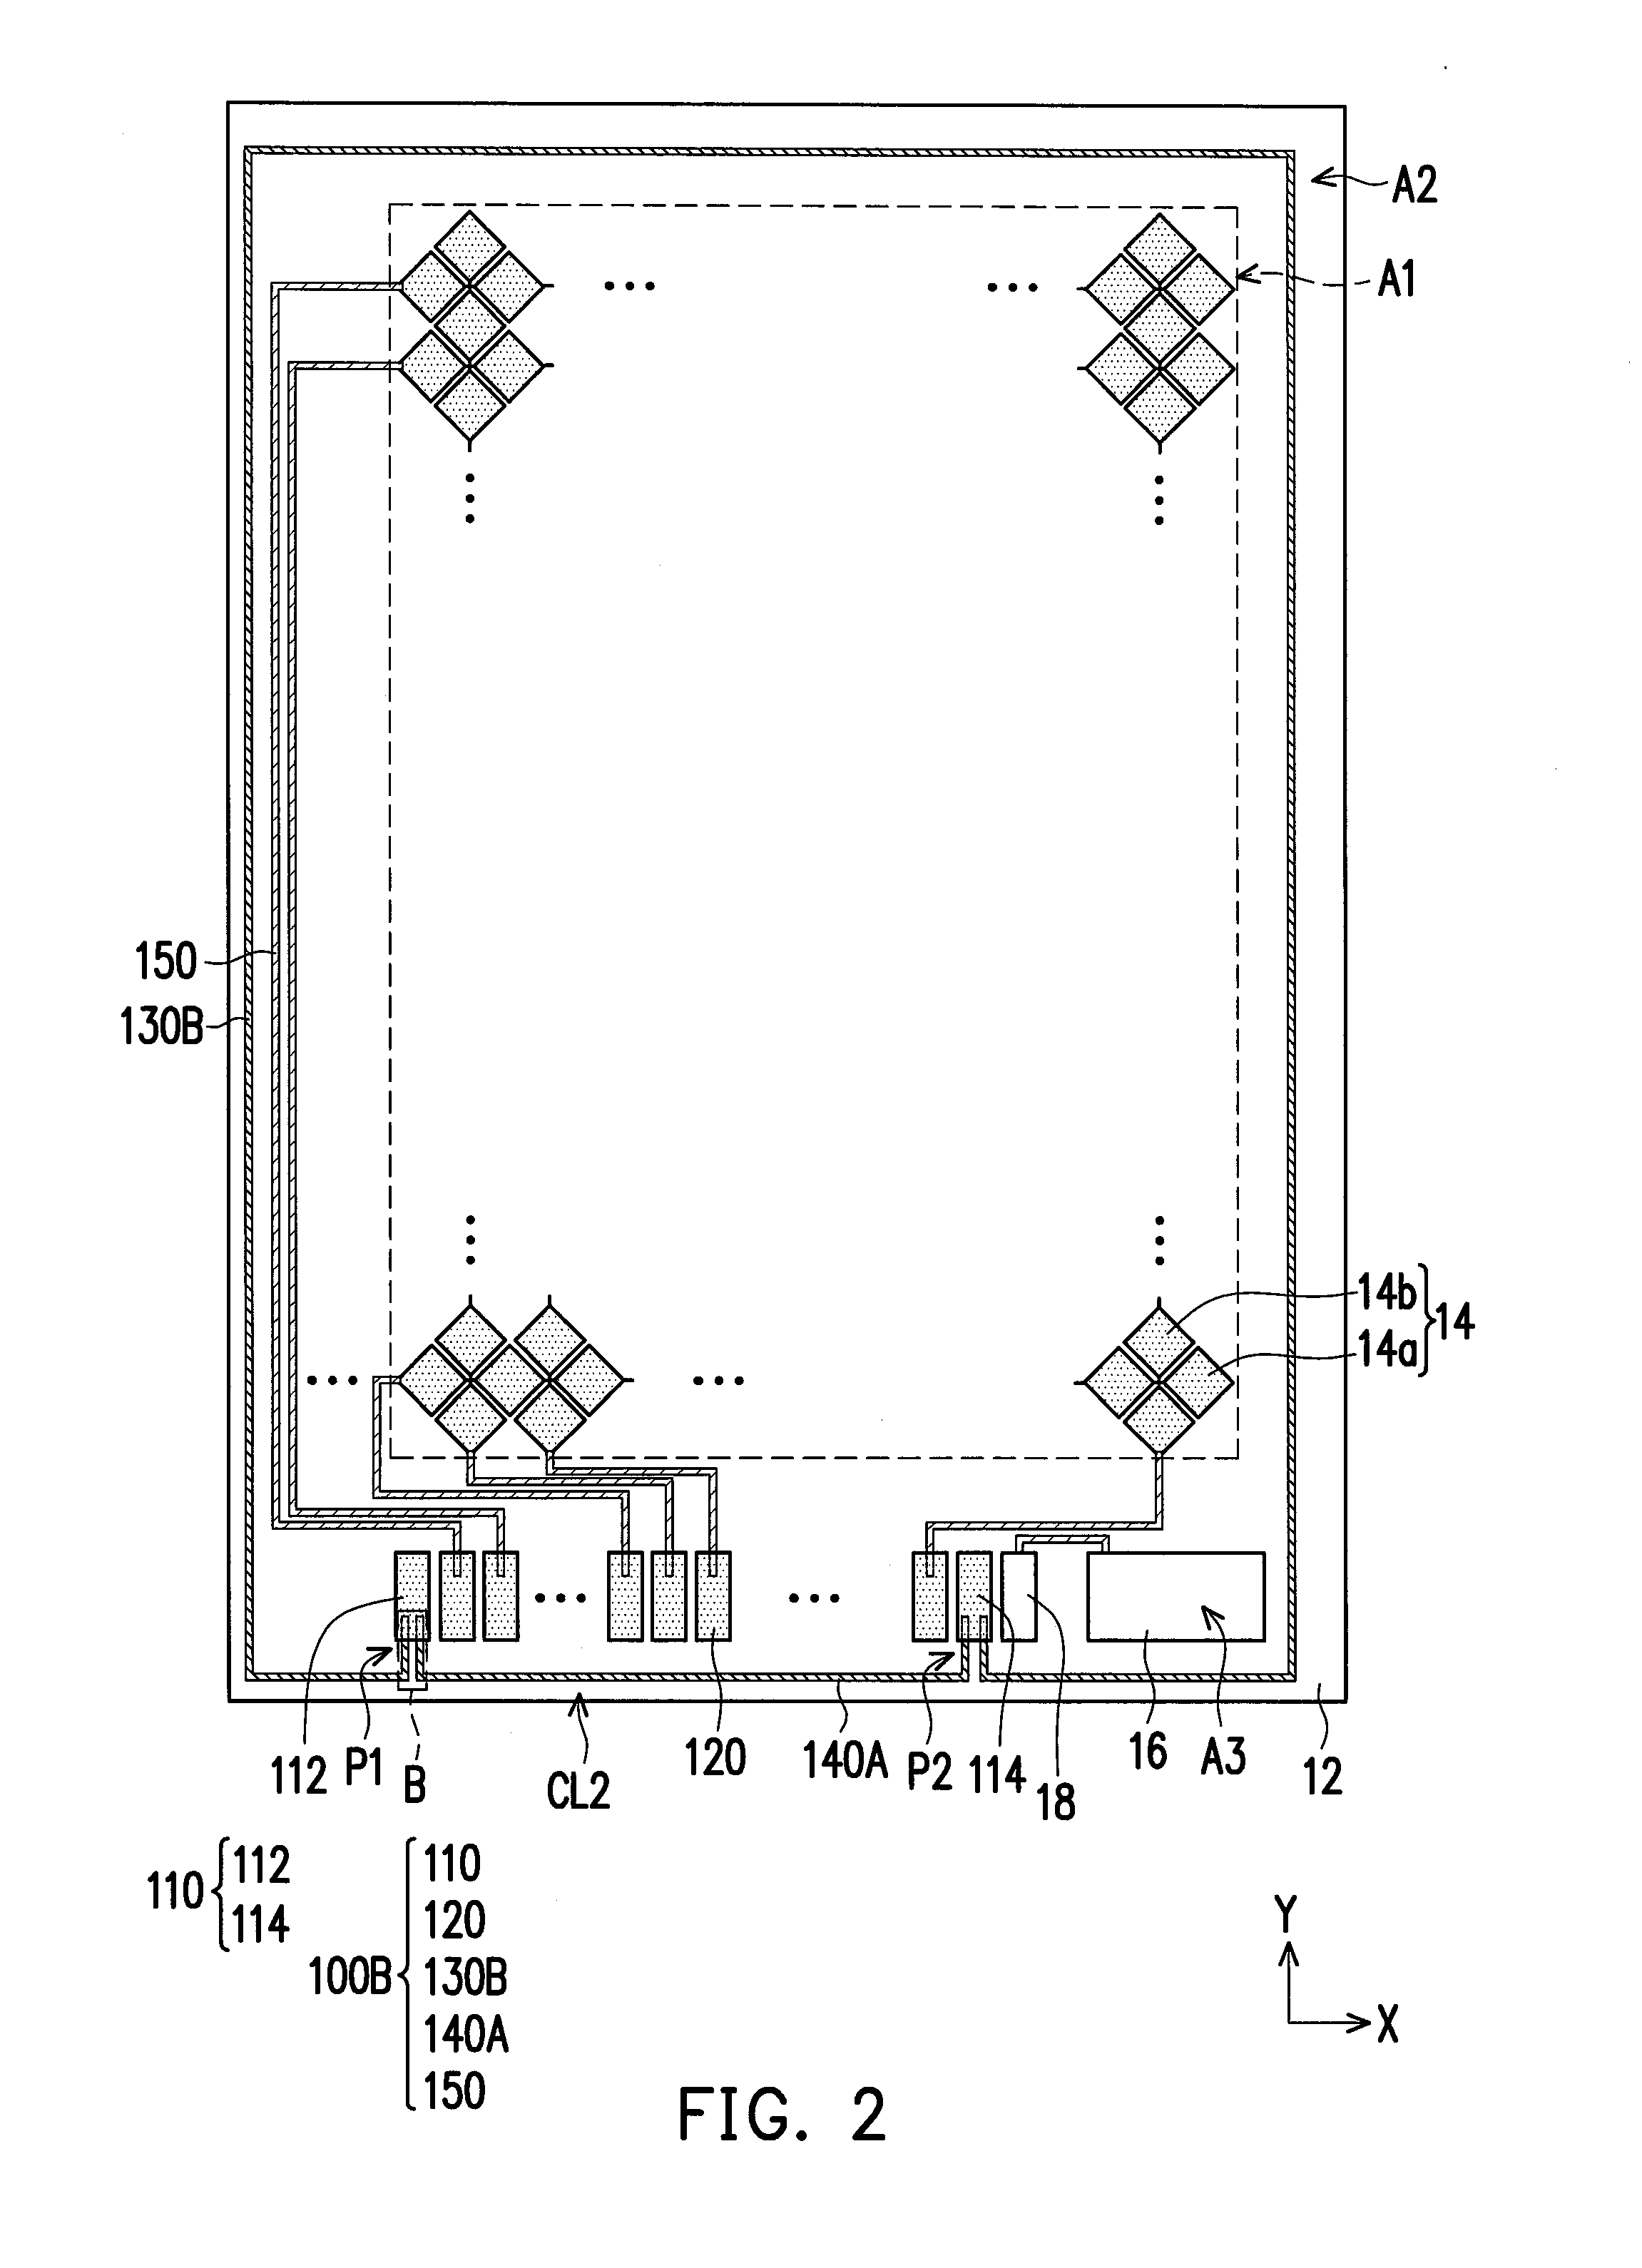 Peripheral circuit structure